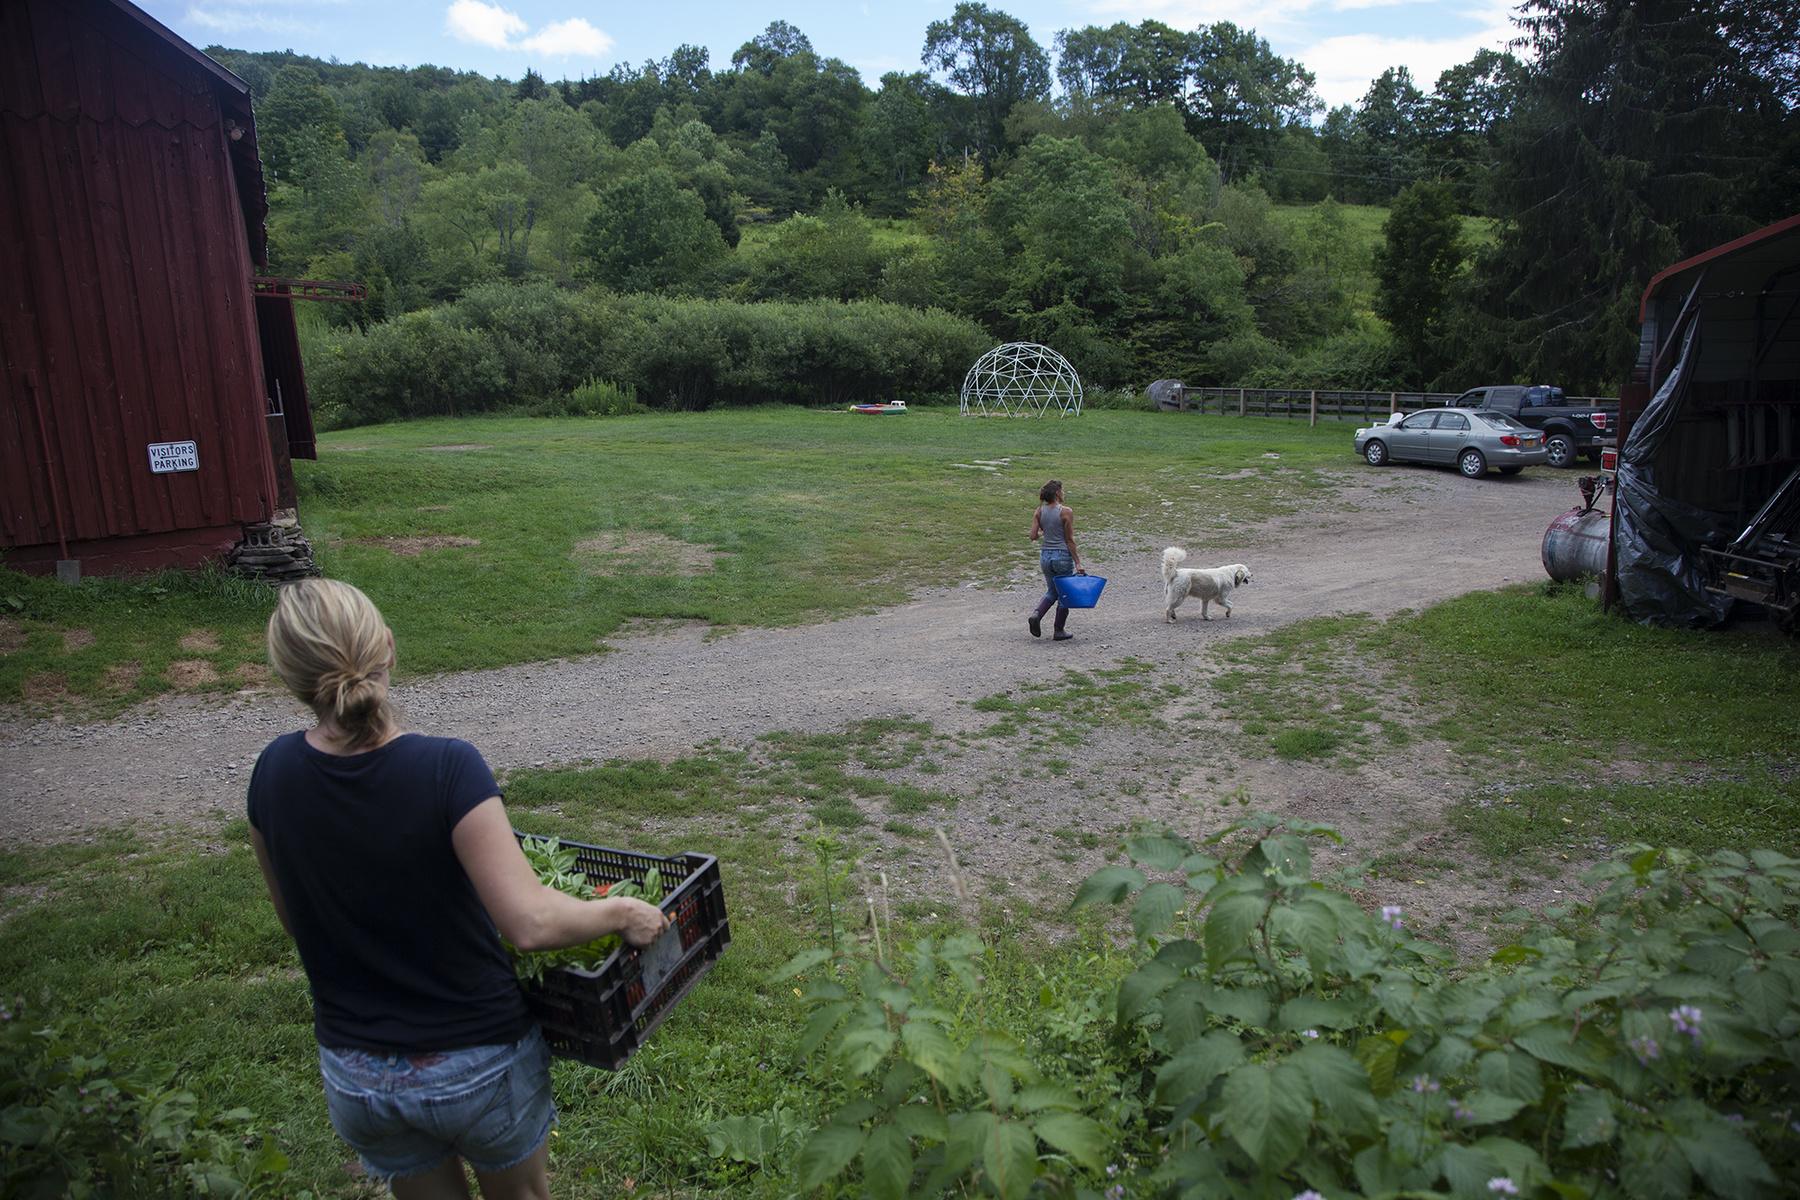  Their slogan "Let your family free-range," caters largely to urban families seeking a rural retreat. Guests are invited to help with farm chores and to pick their own produce.  